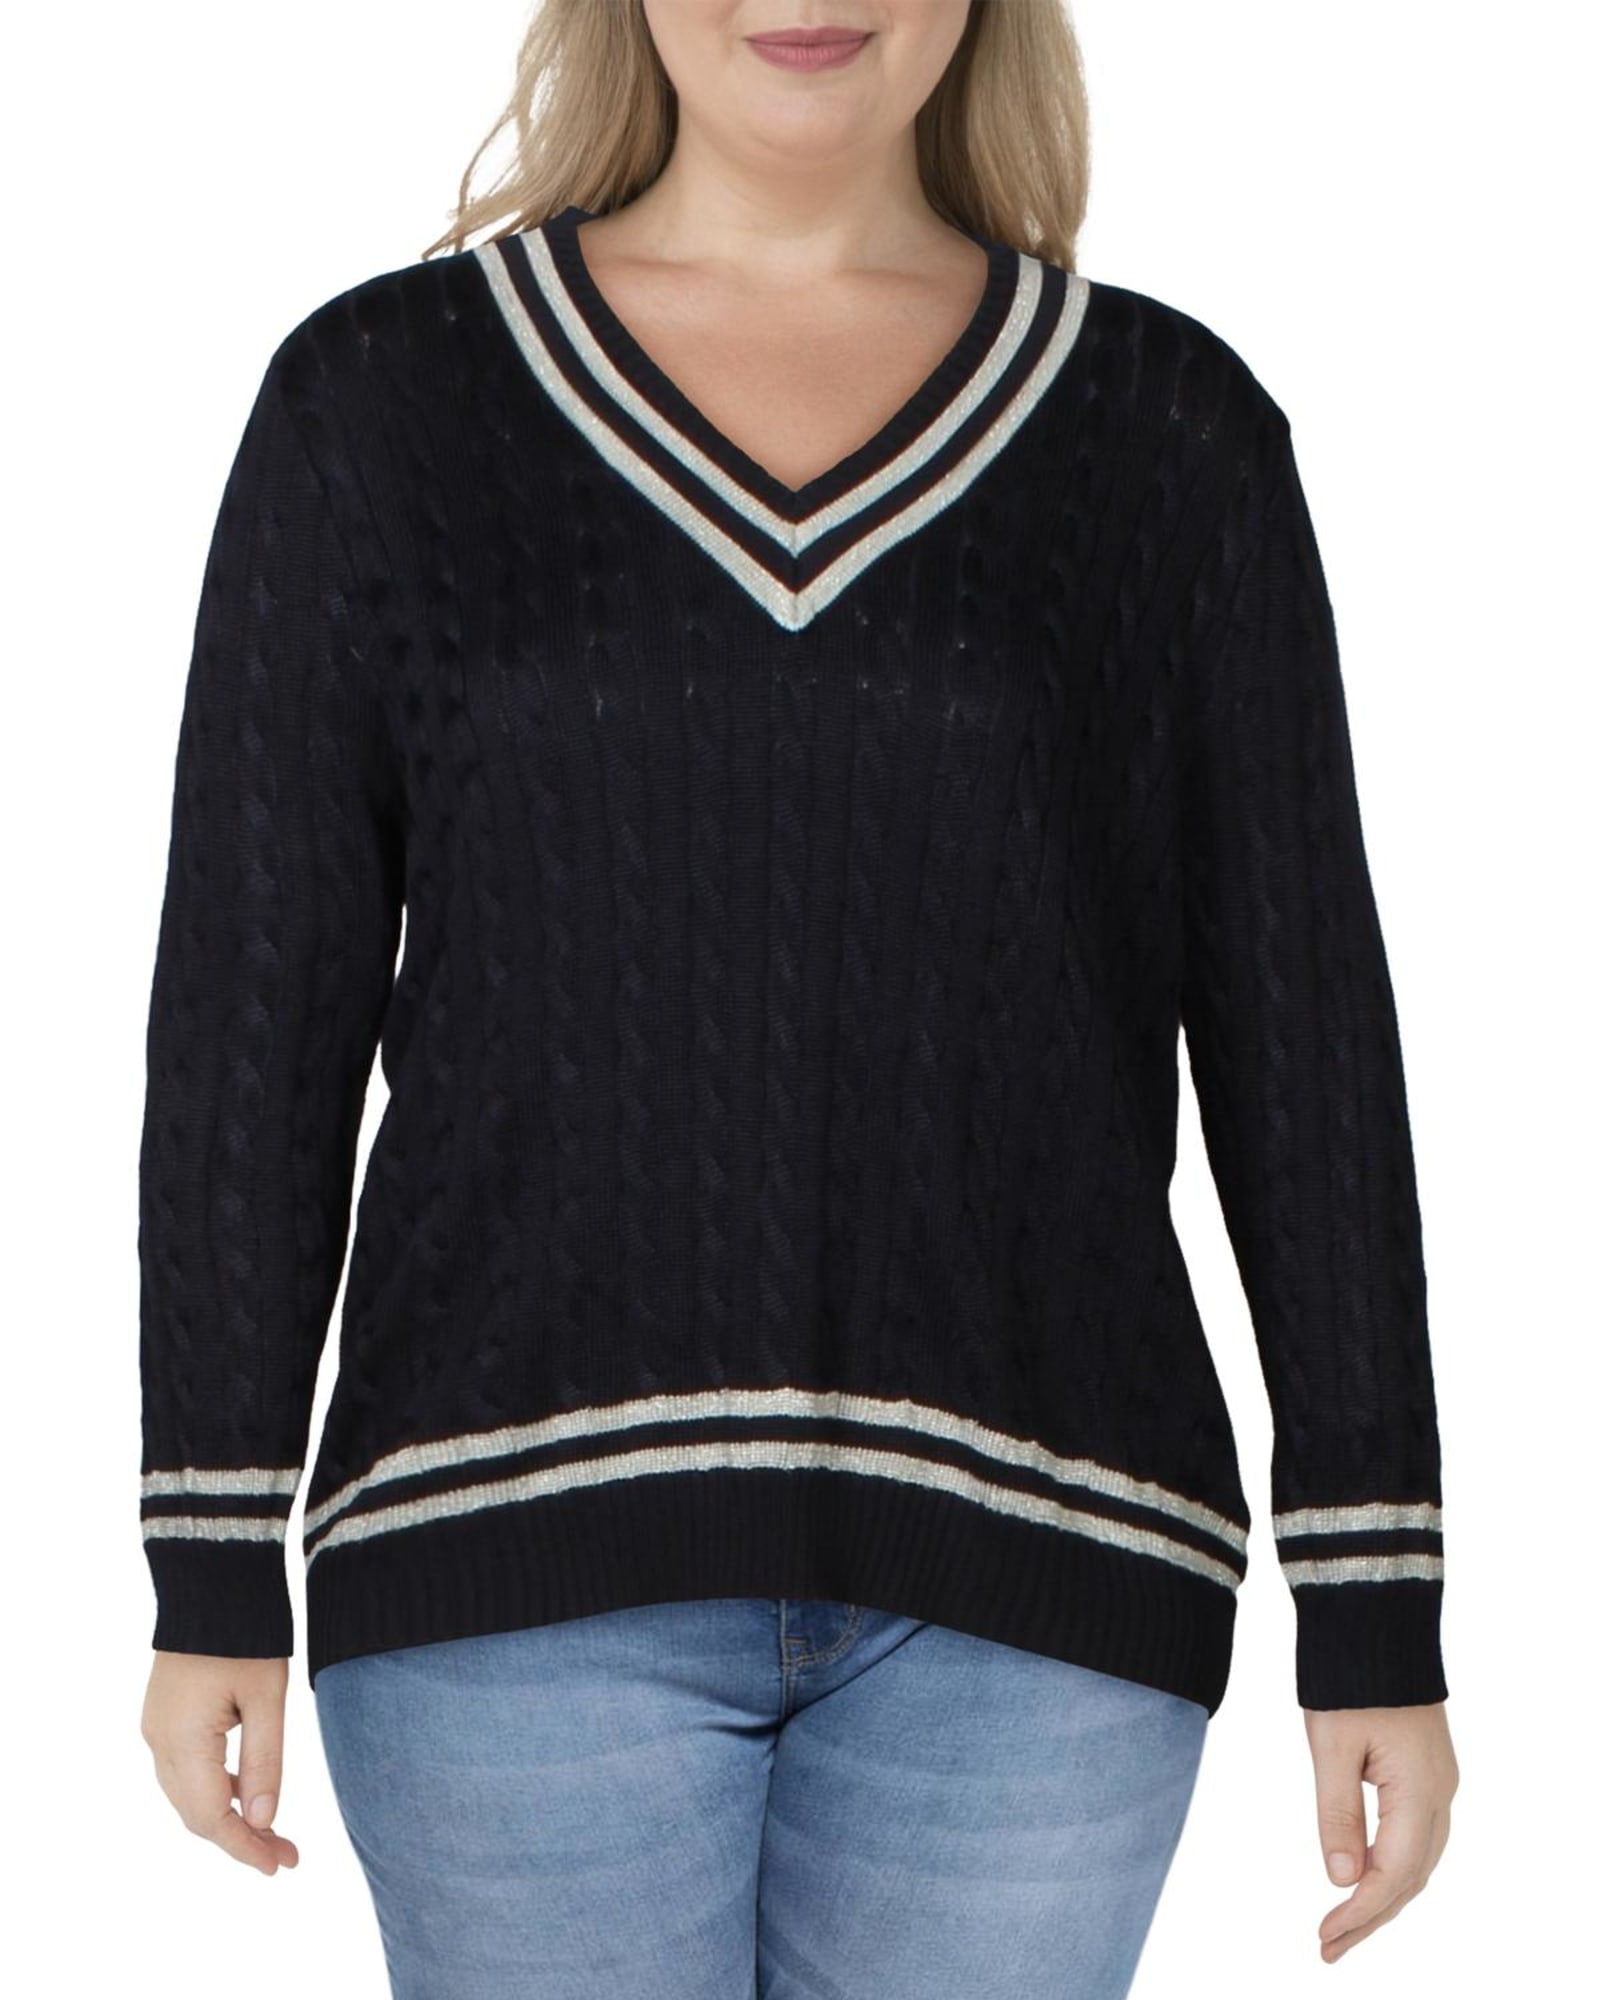 Vince Camuto Women's Bobble Stitch Sleeve Pullover Sweater (Rich